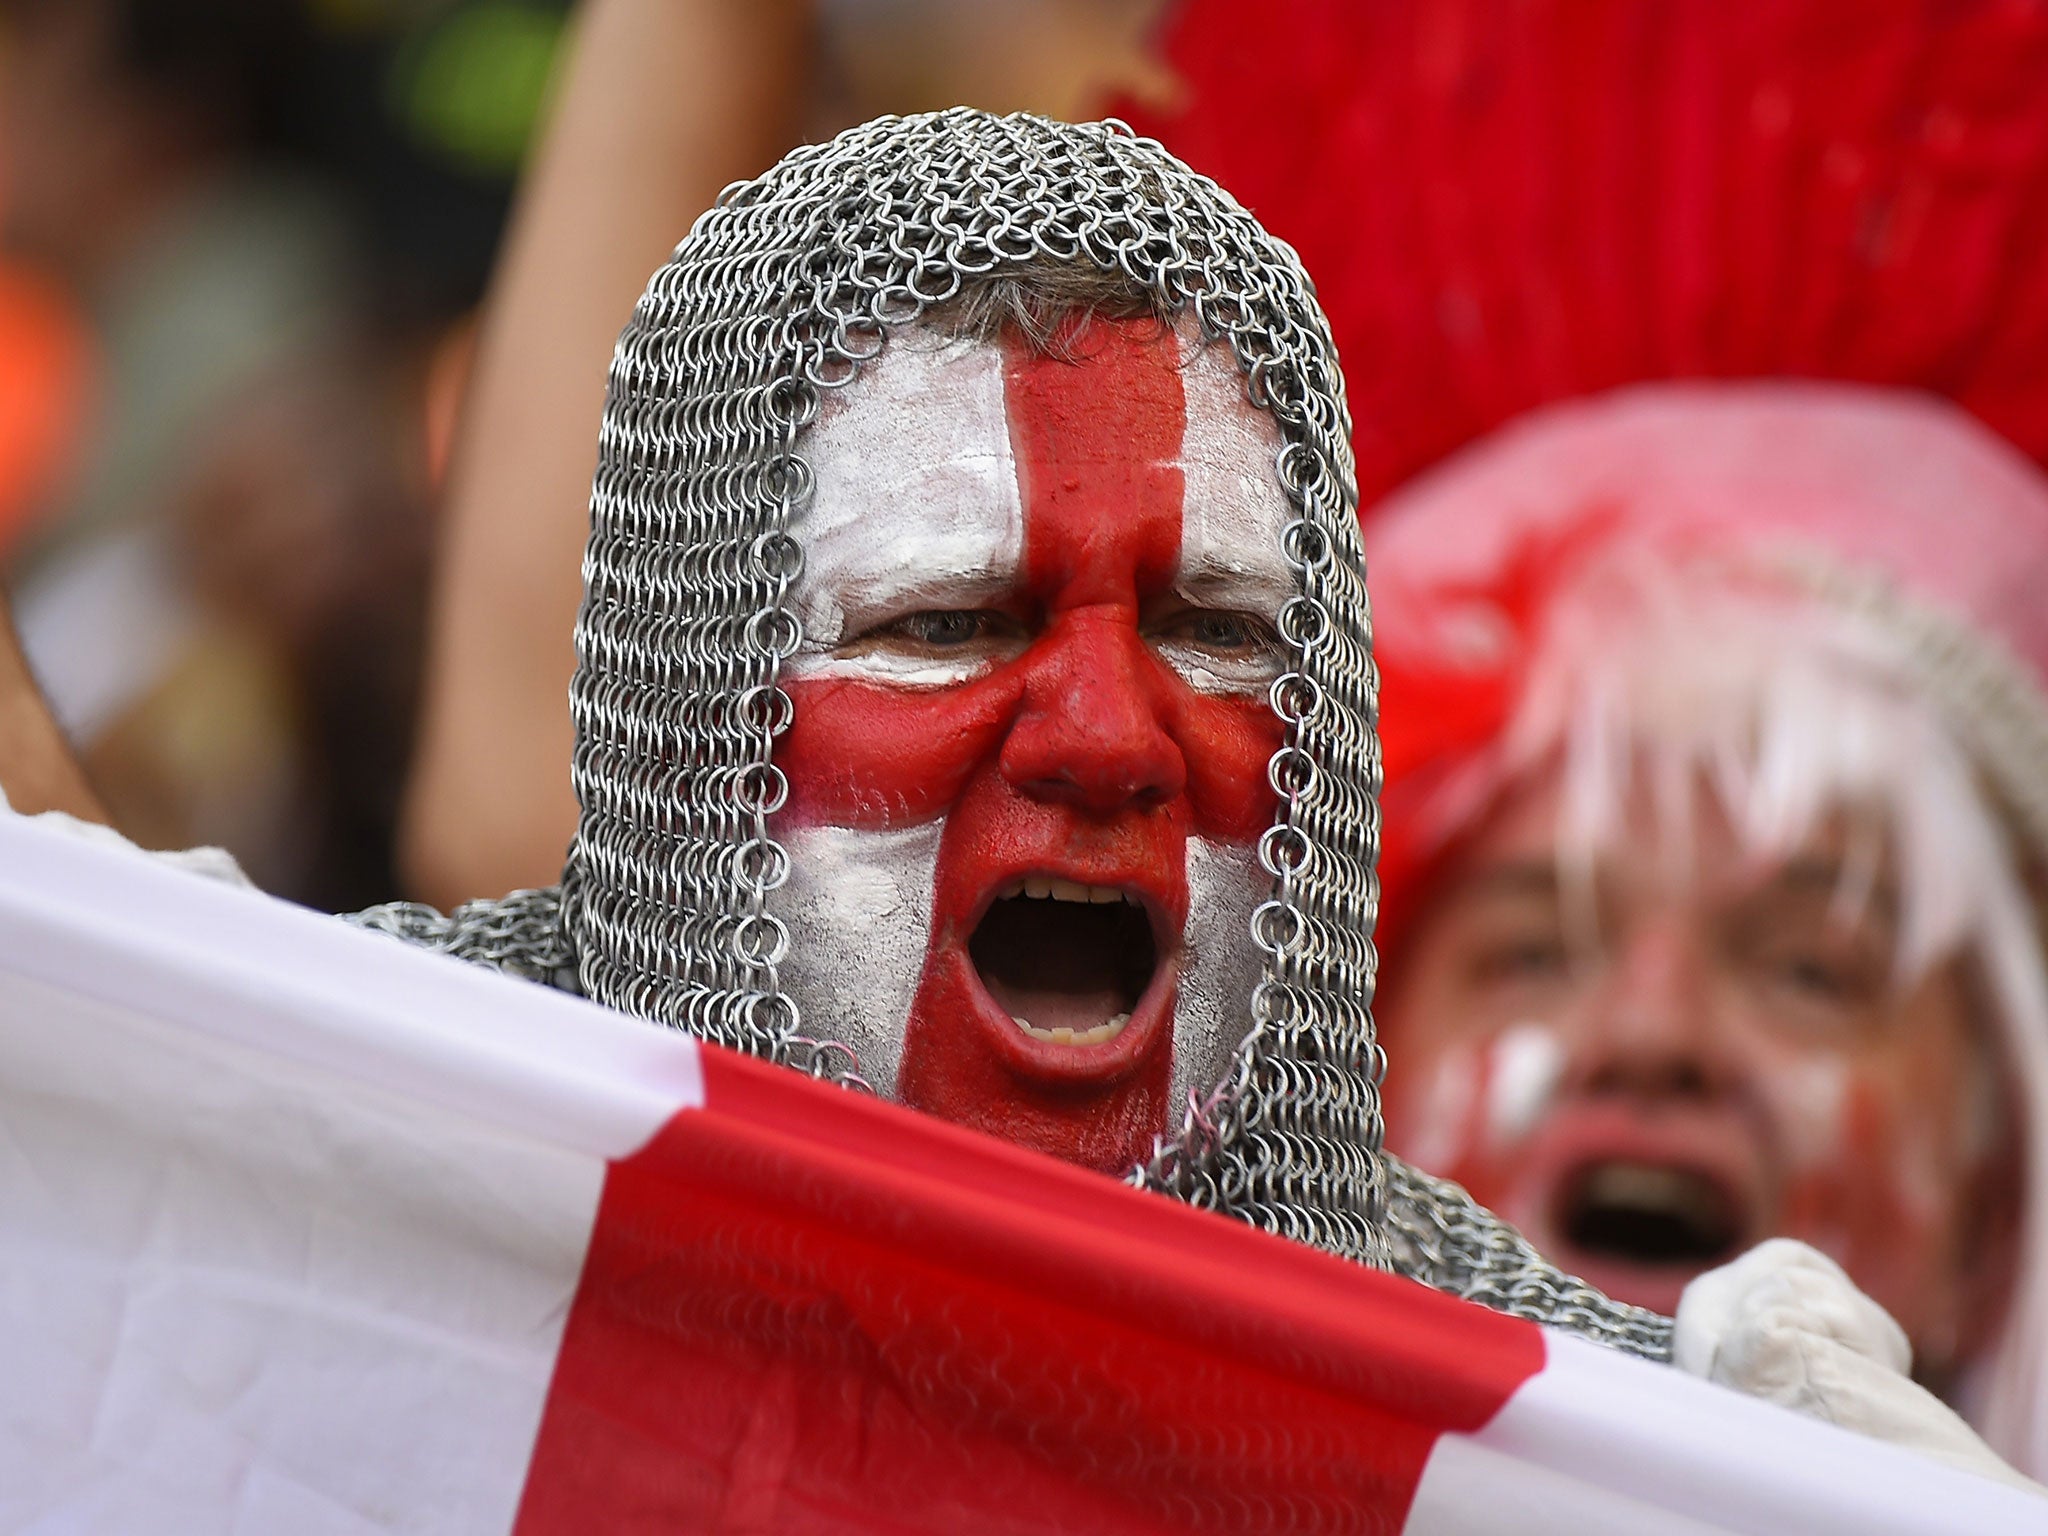 An England fan with his face painted in the colours of his national flag and wearing a chain mail costume cheers prior to a football match between England and Italy